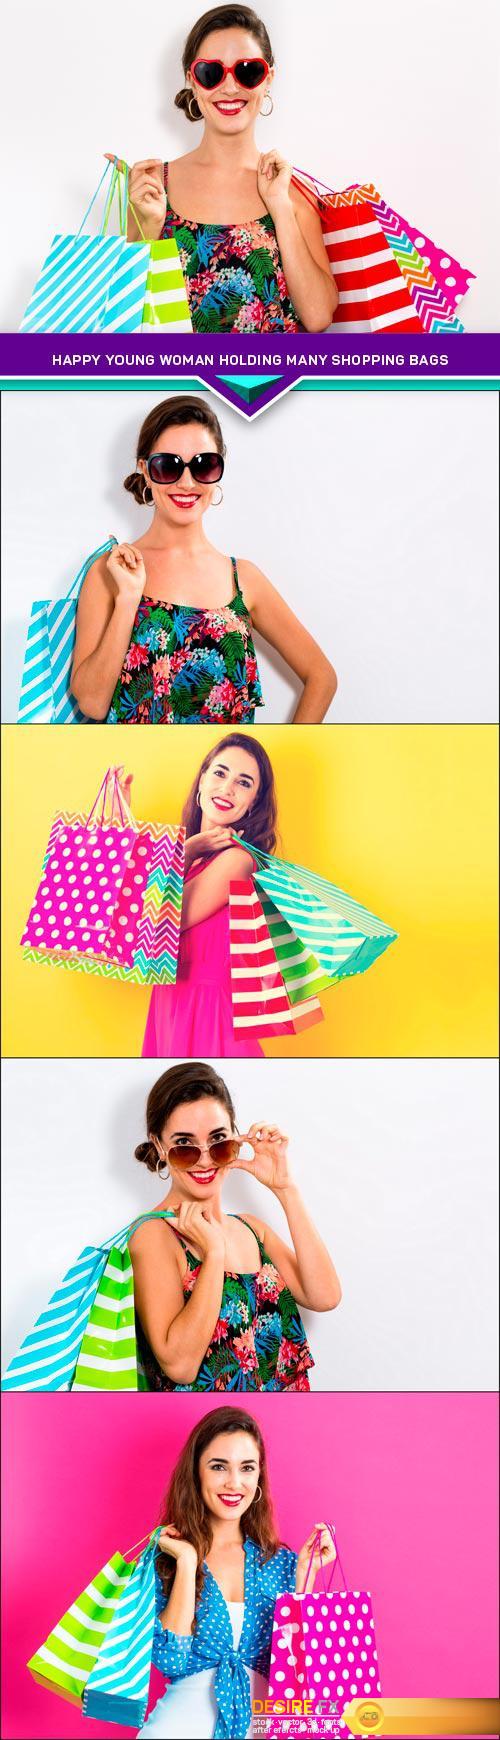 Happy young woman holding many shopping bags 5X JPEG